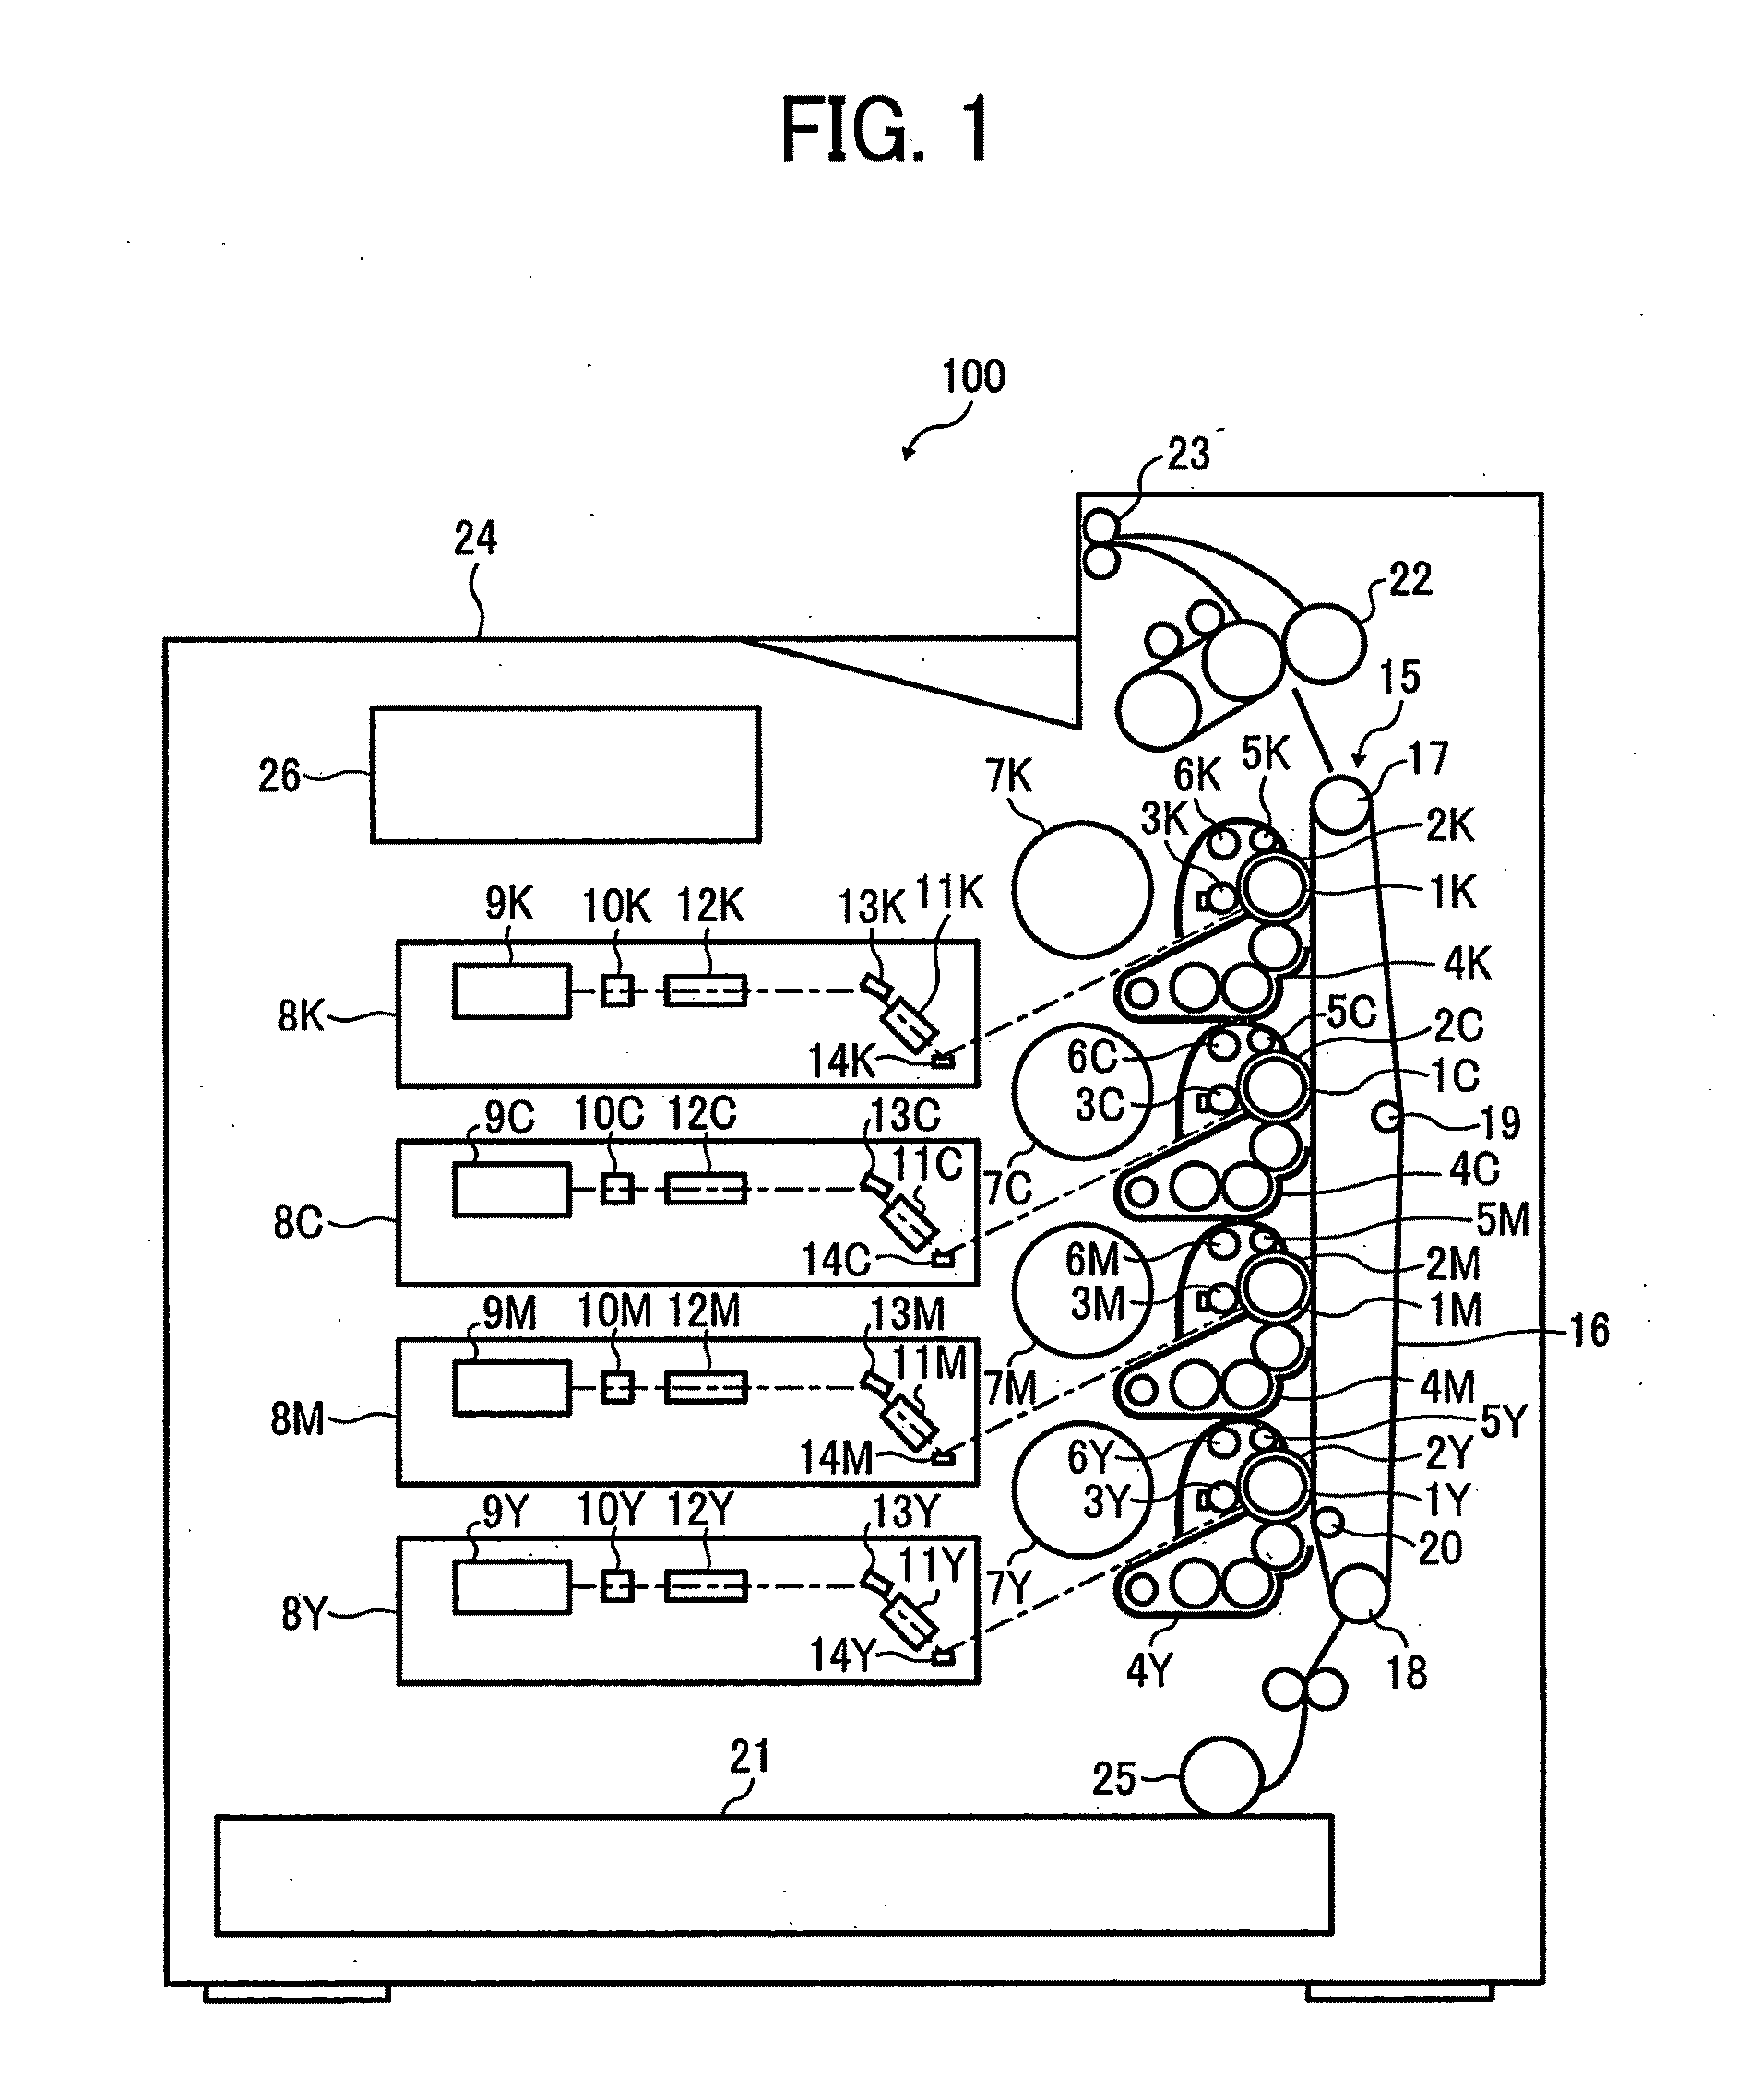 Image processing apparatus and method for image processing